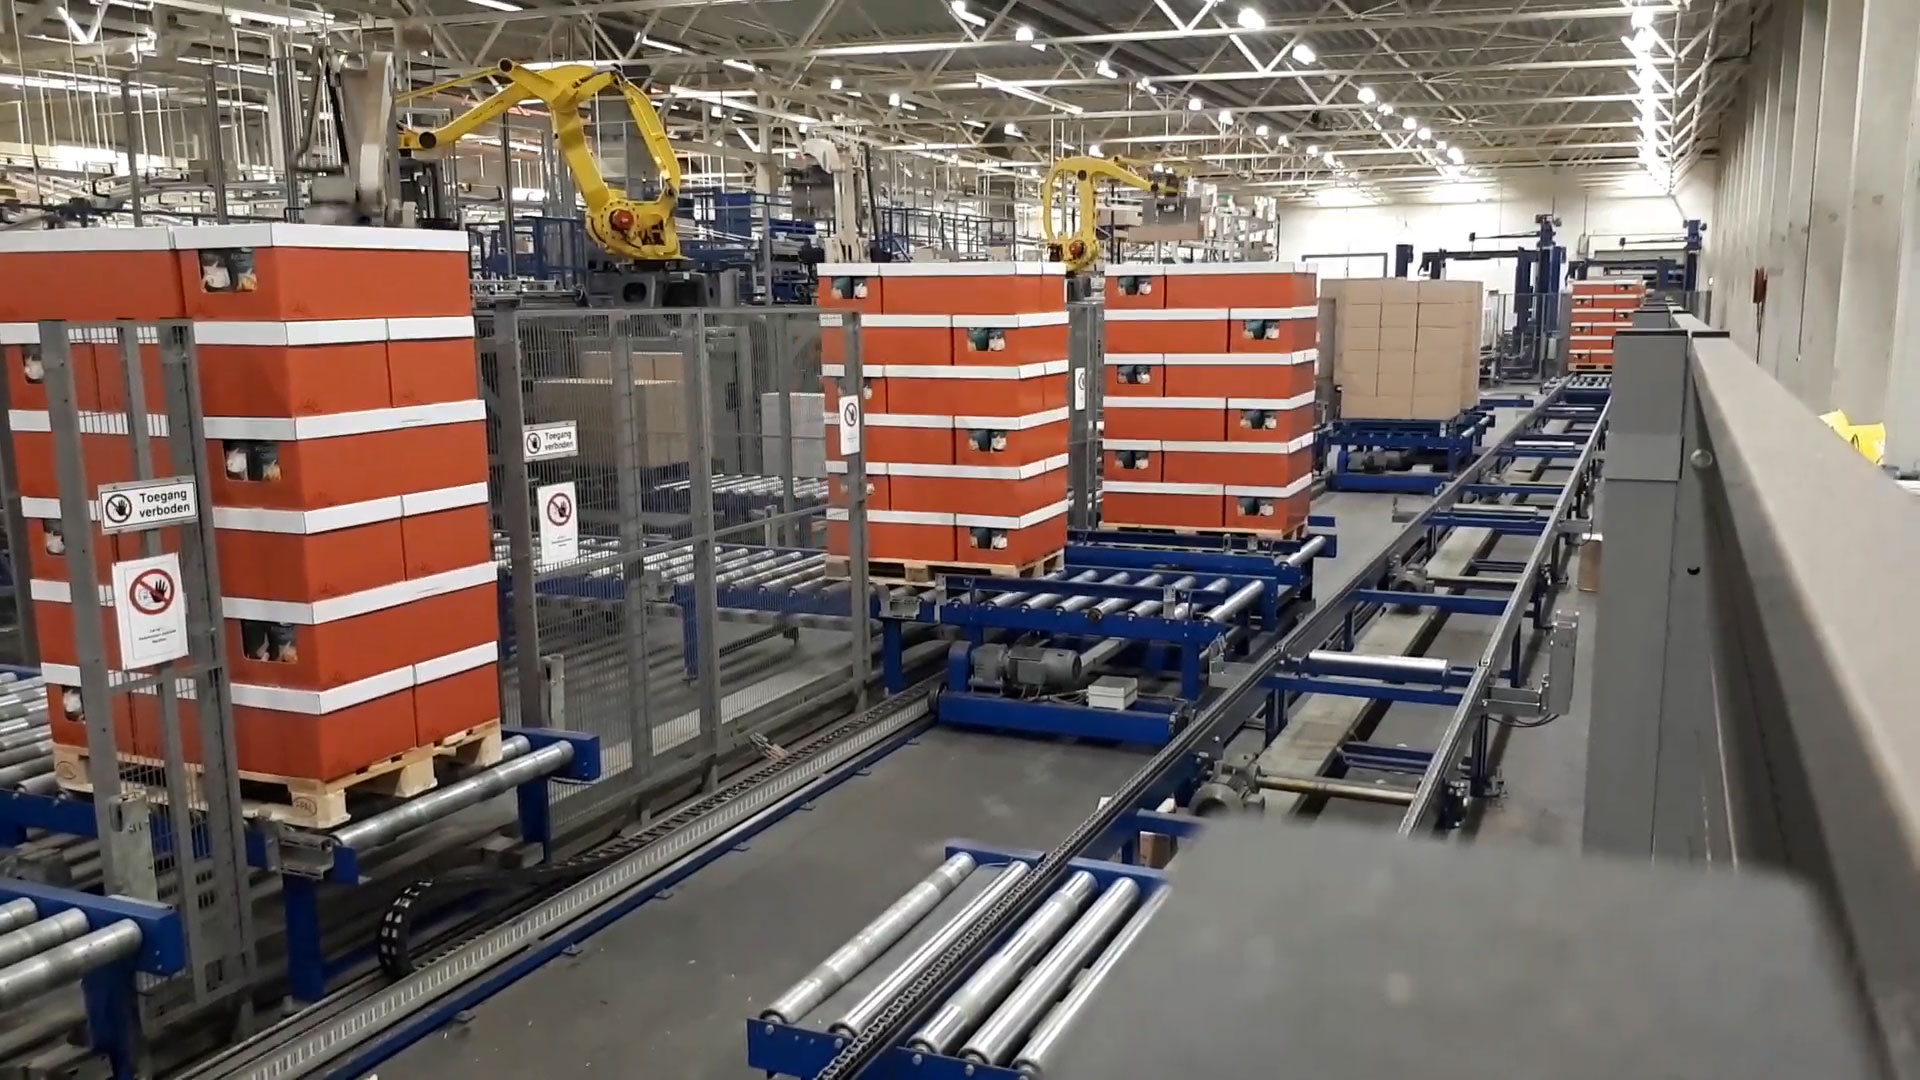 Pallet conveying components: shuttle wagon, cross overs, pallet roller conveyor